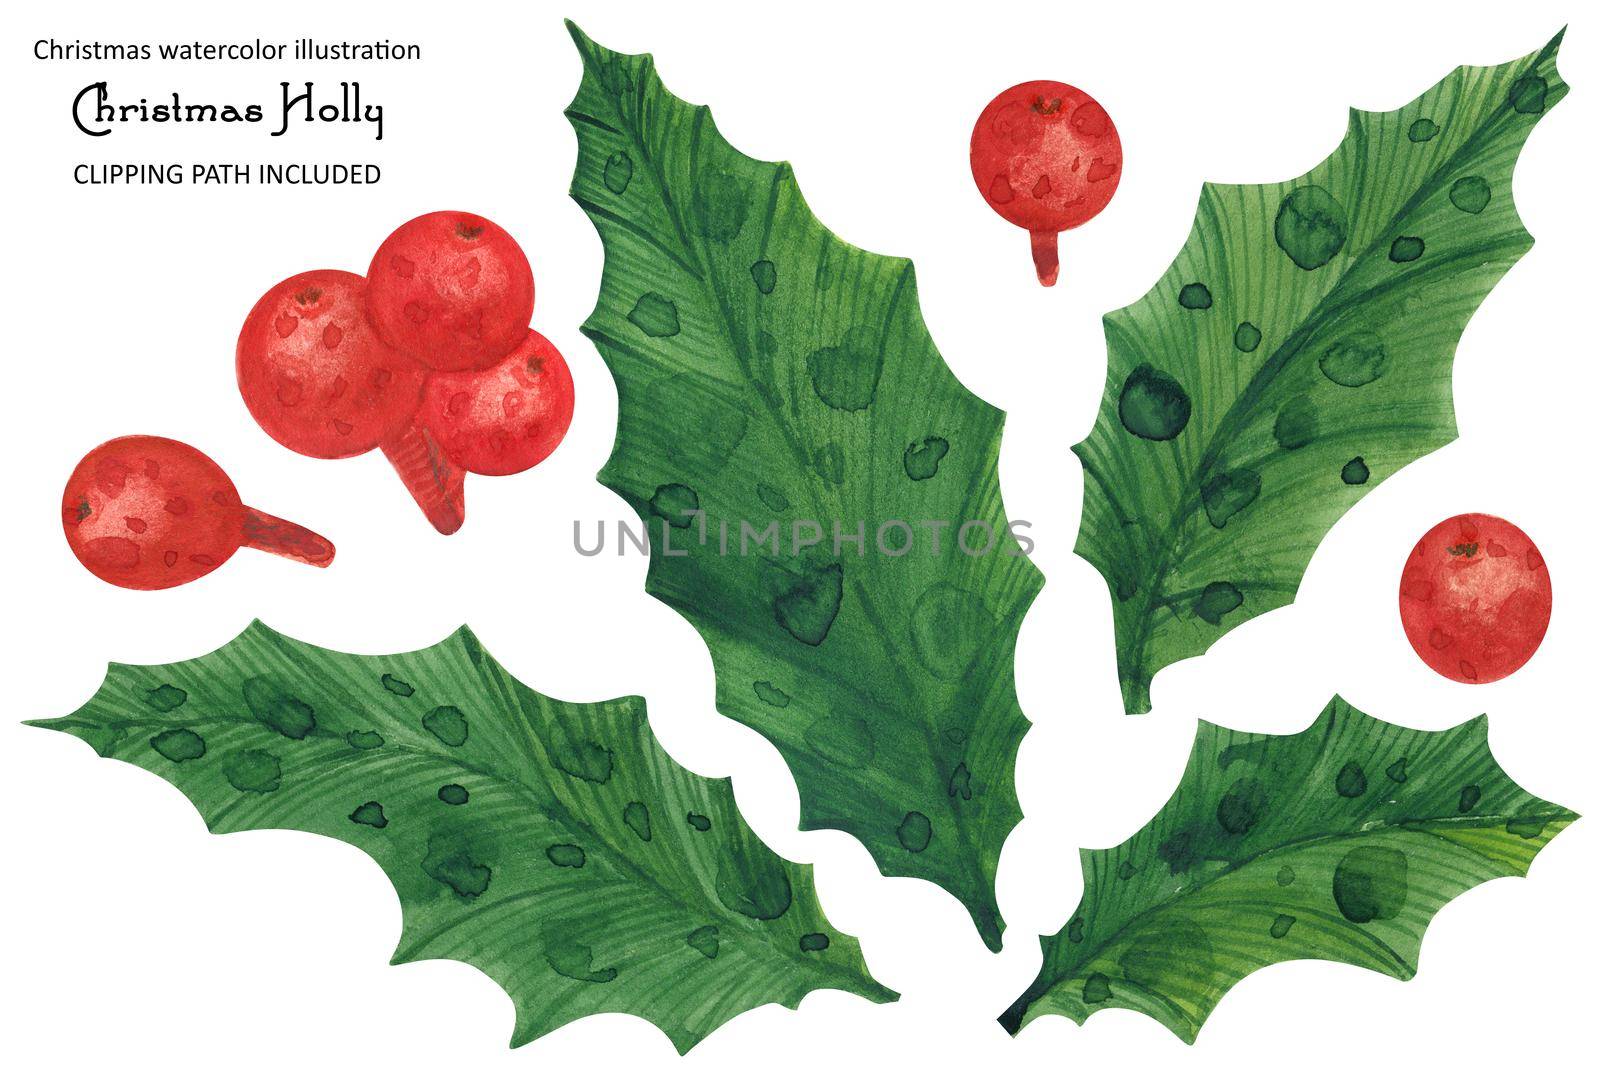 Christmas Holly watercolor set of leaves and berries, isolated watercolor and clipping path